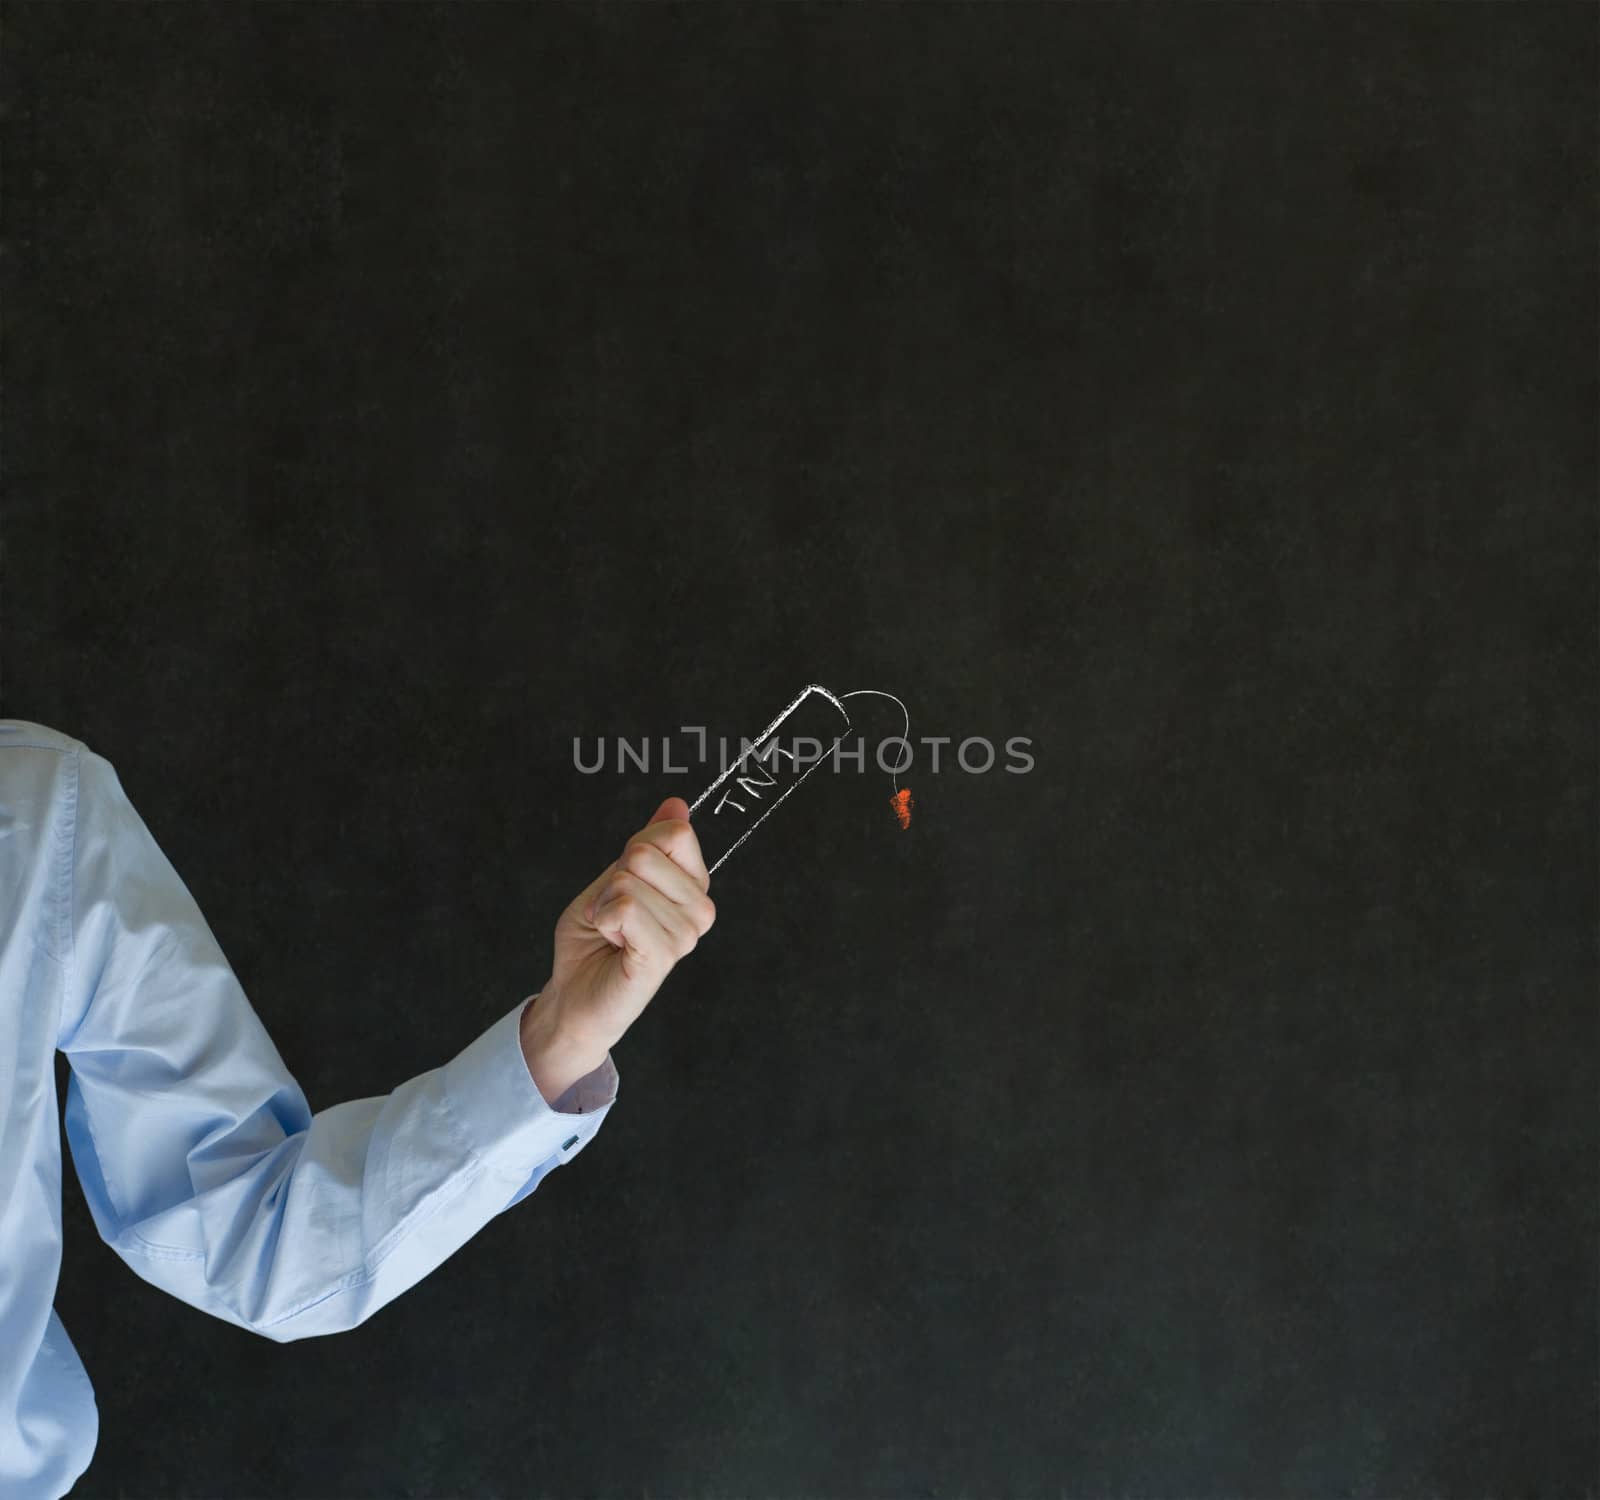 Business man, teacher or student arm and hand holding chalk tnt dynamite on blackboard background